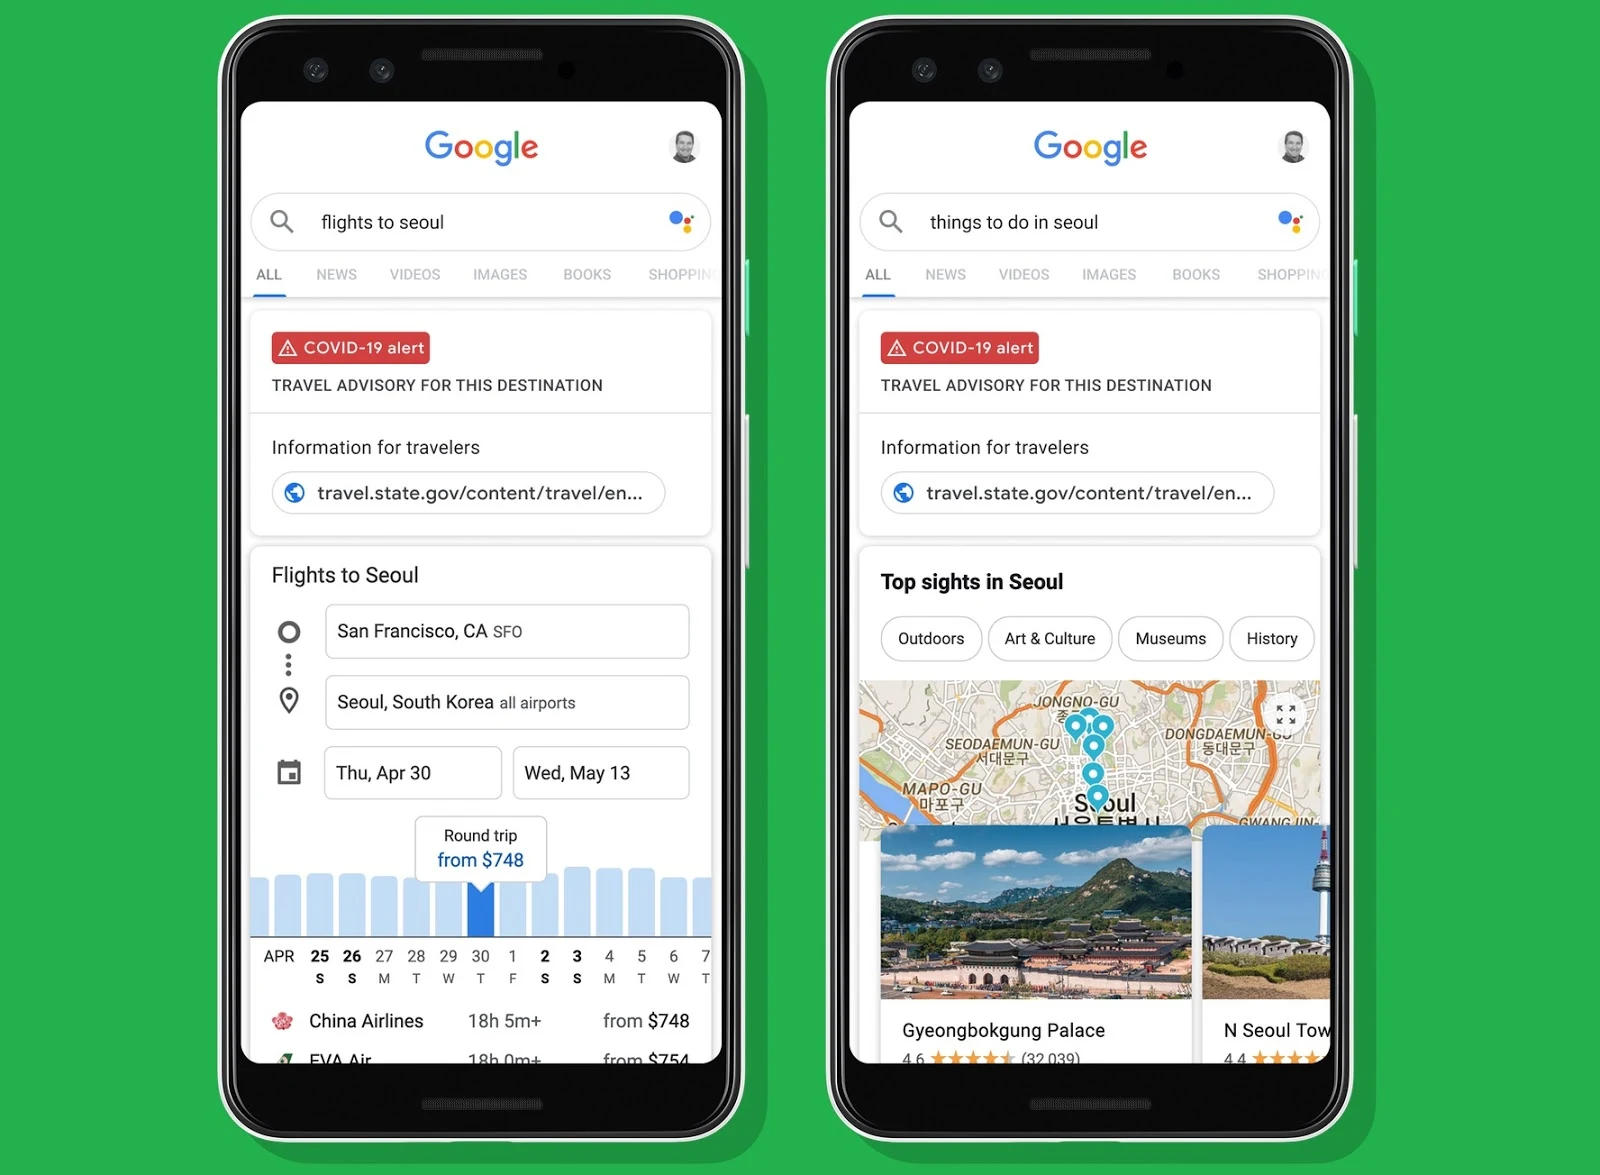 Stay updated on travel advisories and airline policies with Google